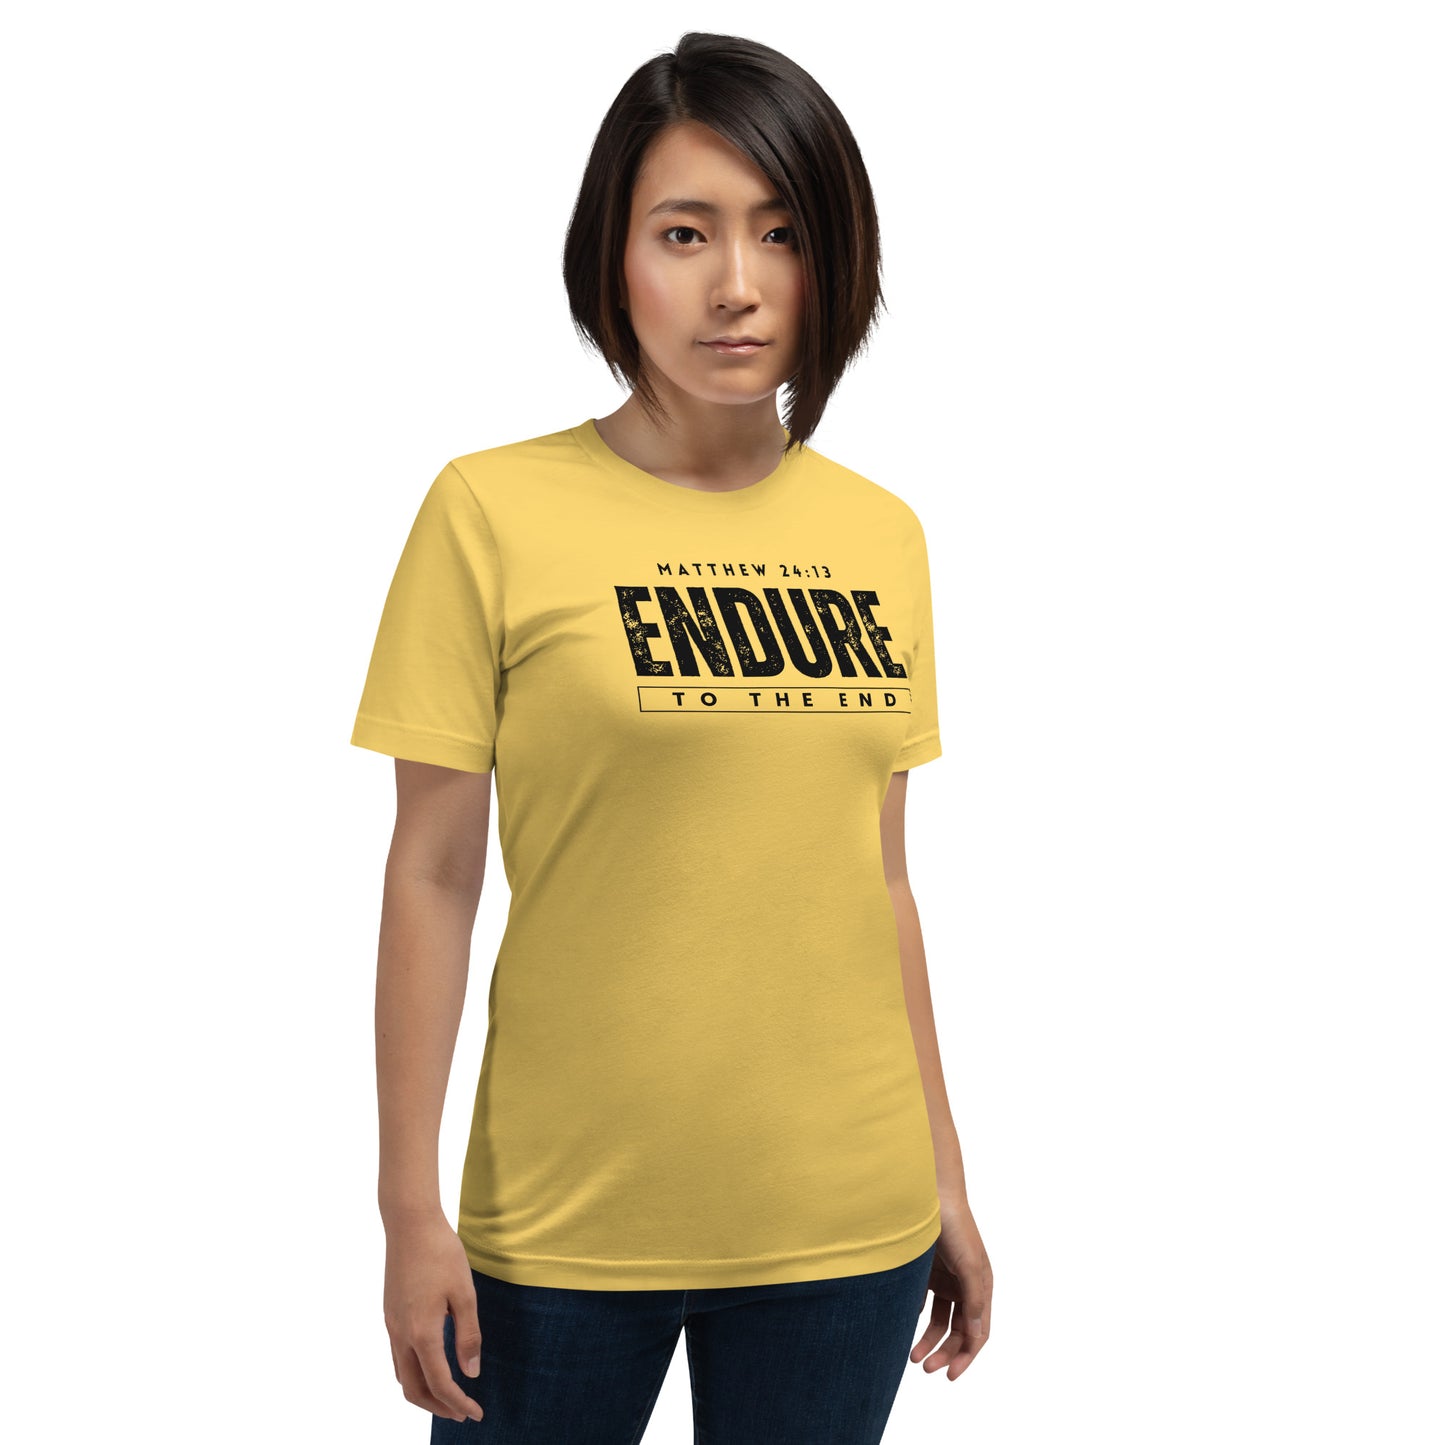 Endure to the End t-shirt